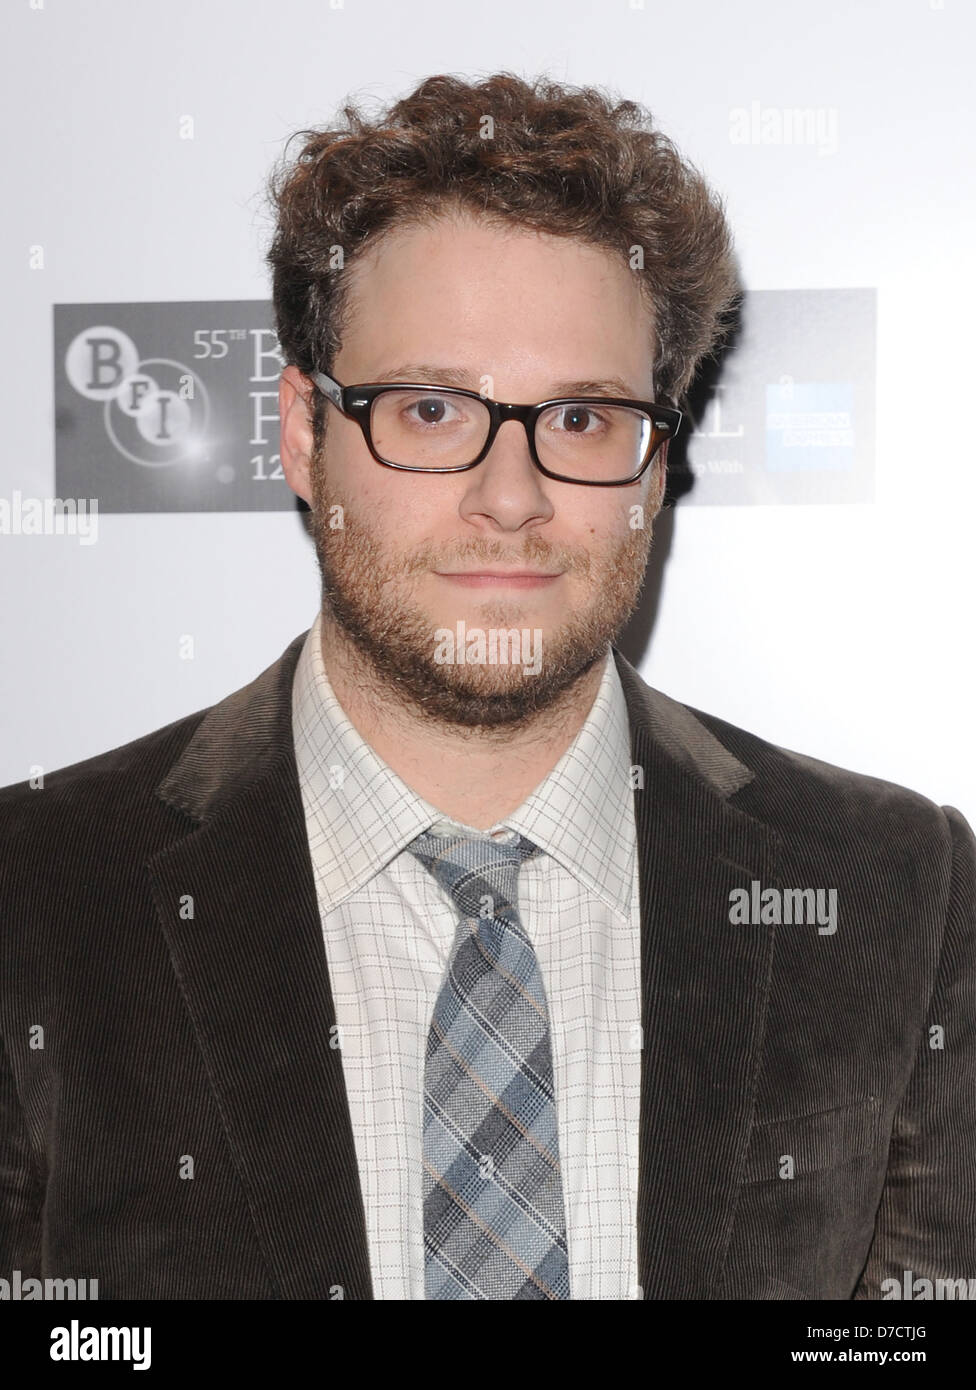 Seth Rogen at the screening of '50/50' at BFI London Film Festival - Arrivals. London, England - 13.10.11 Stock Photo